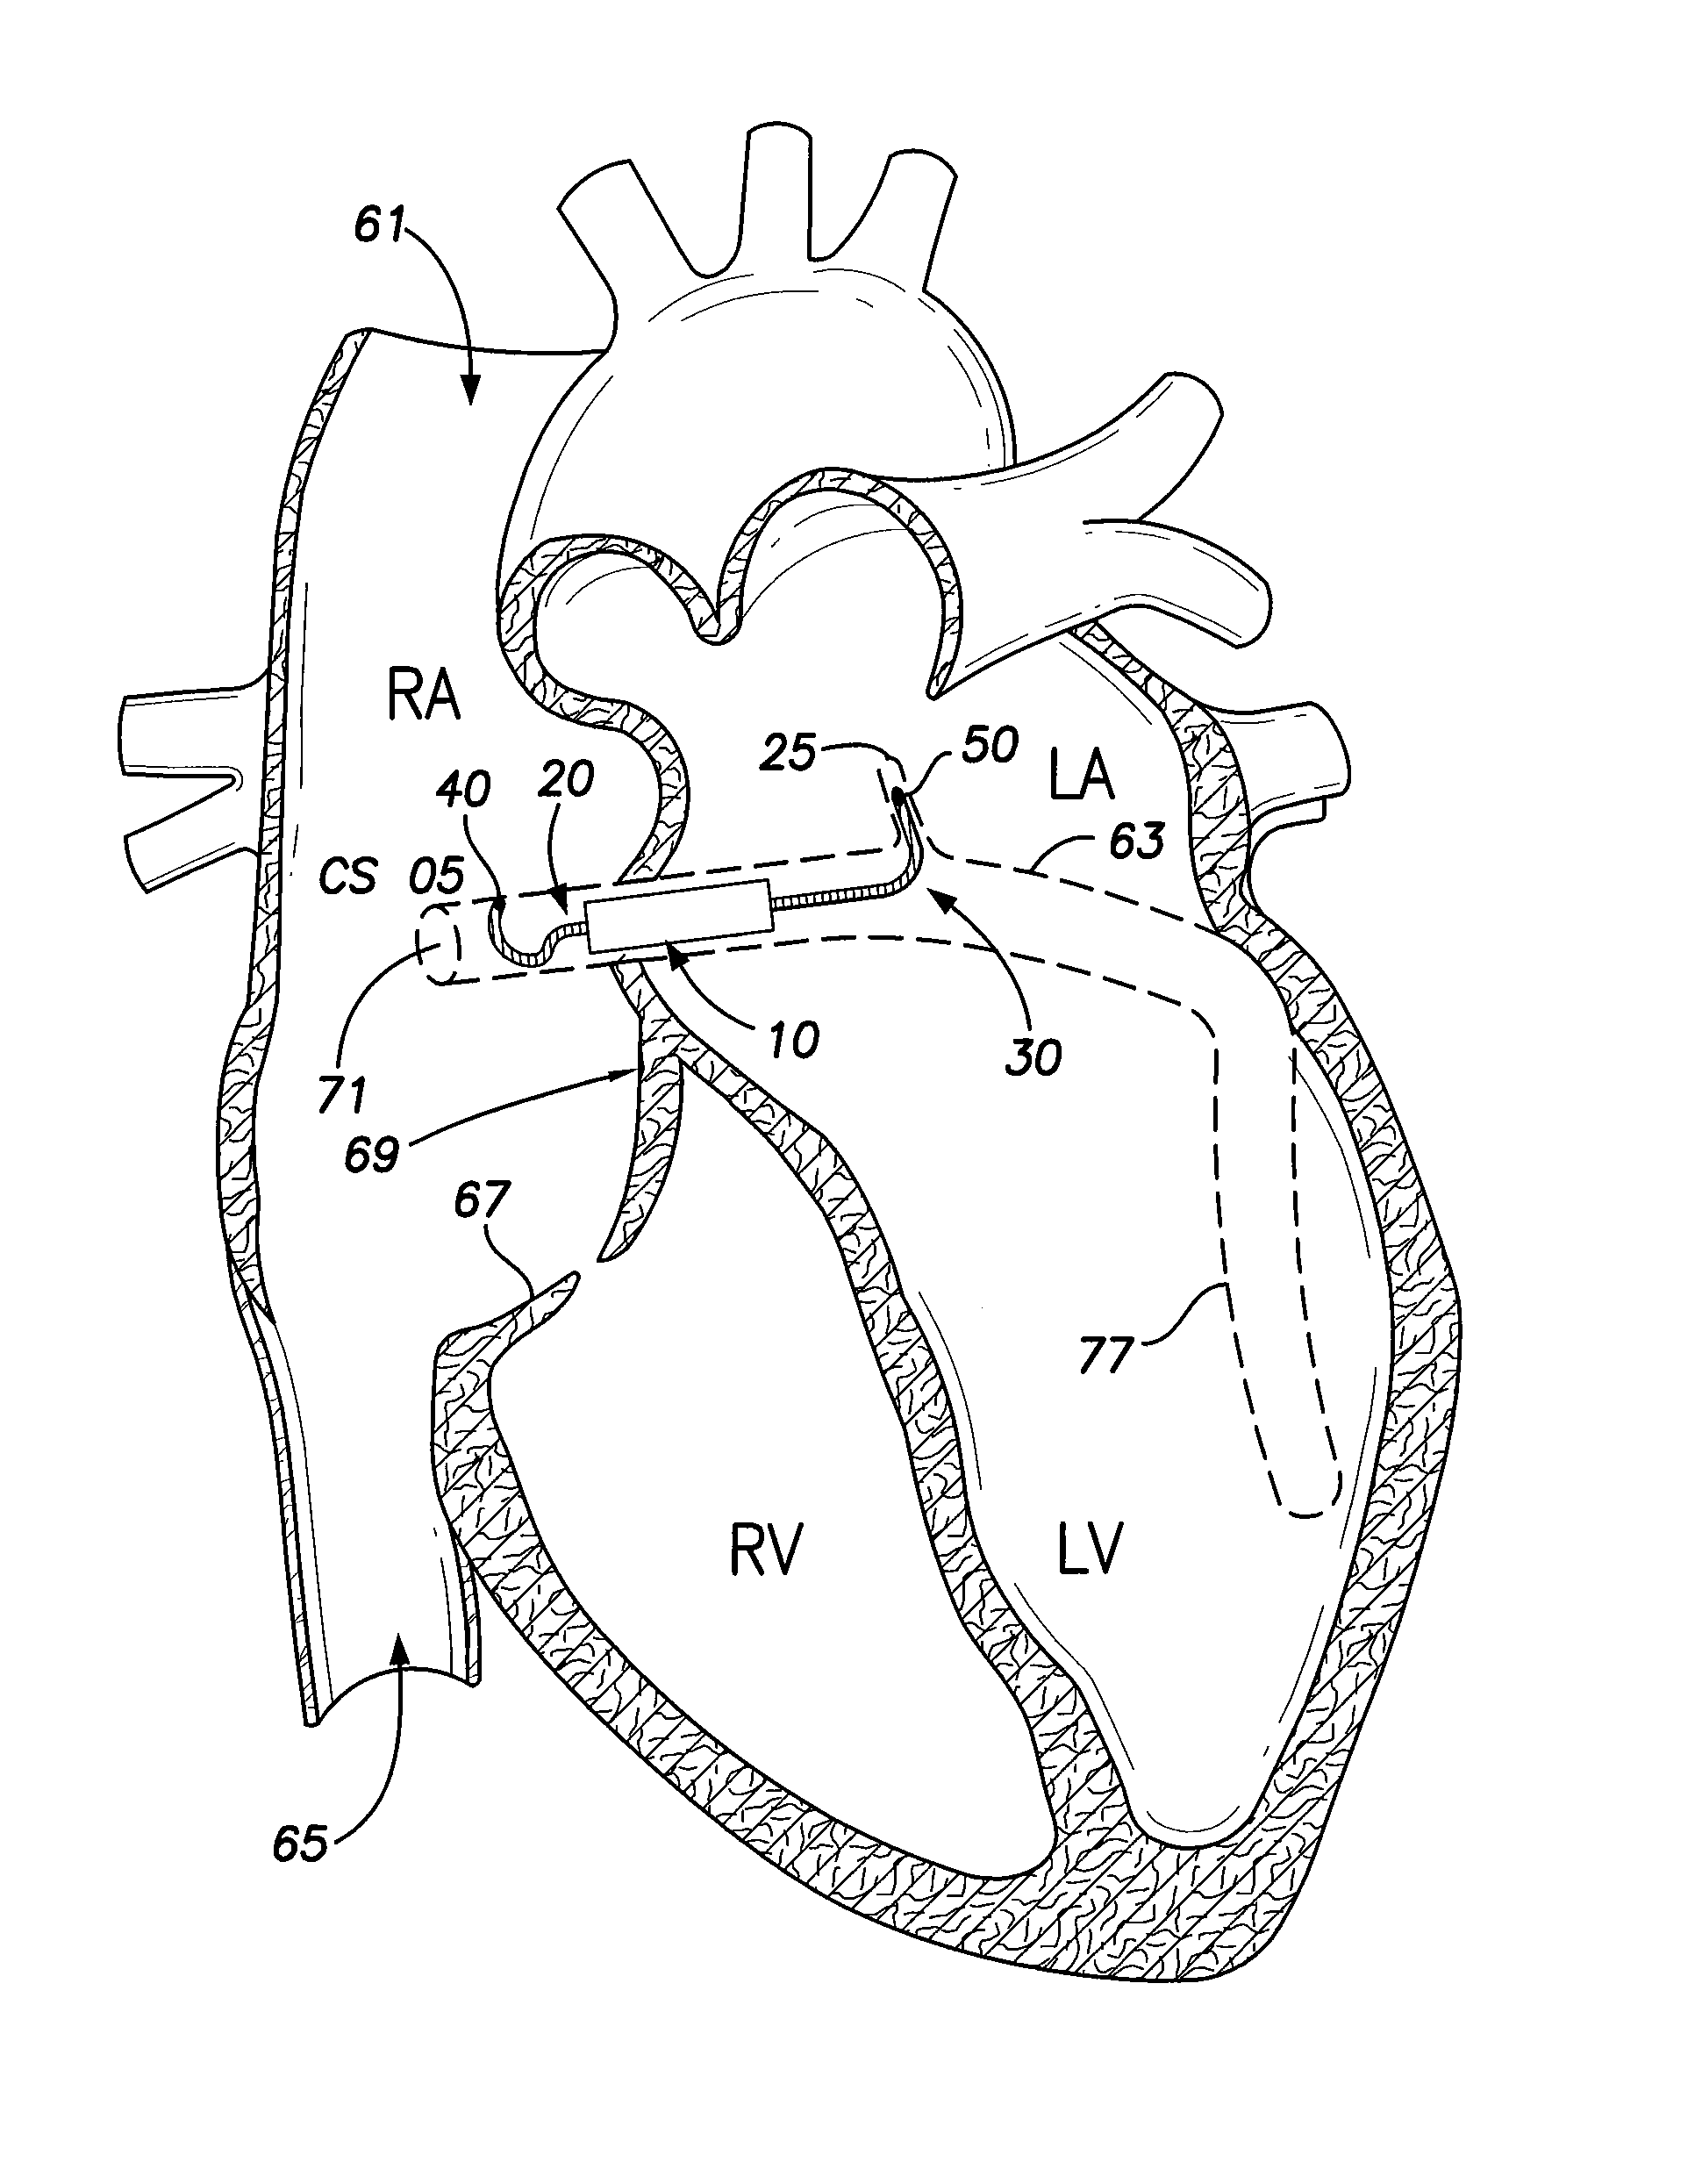 Intracardiac implantable medical device for biatrial and/or left heart pacing and method of implanting same